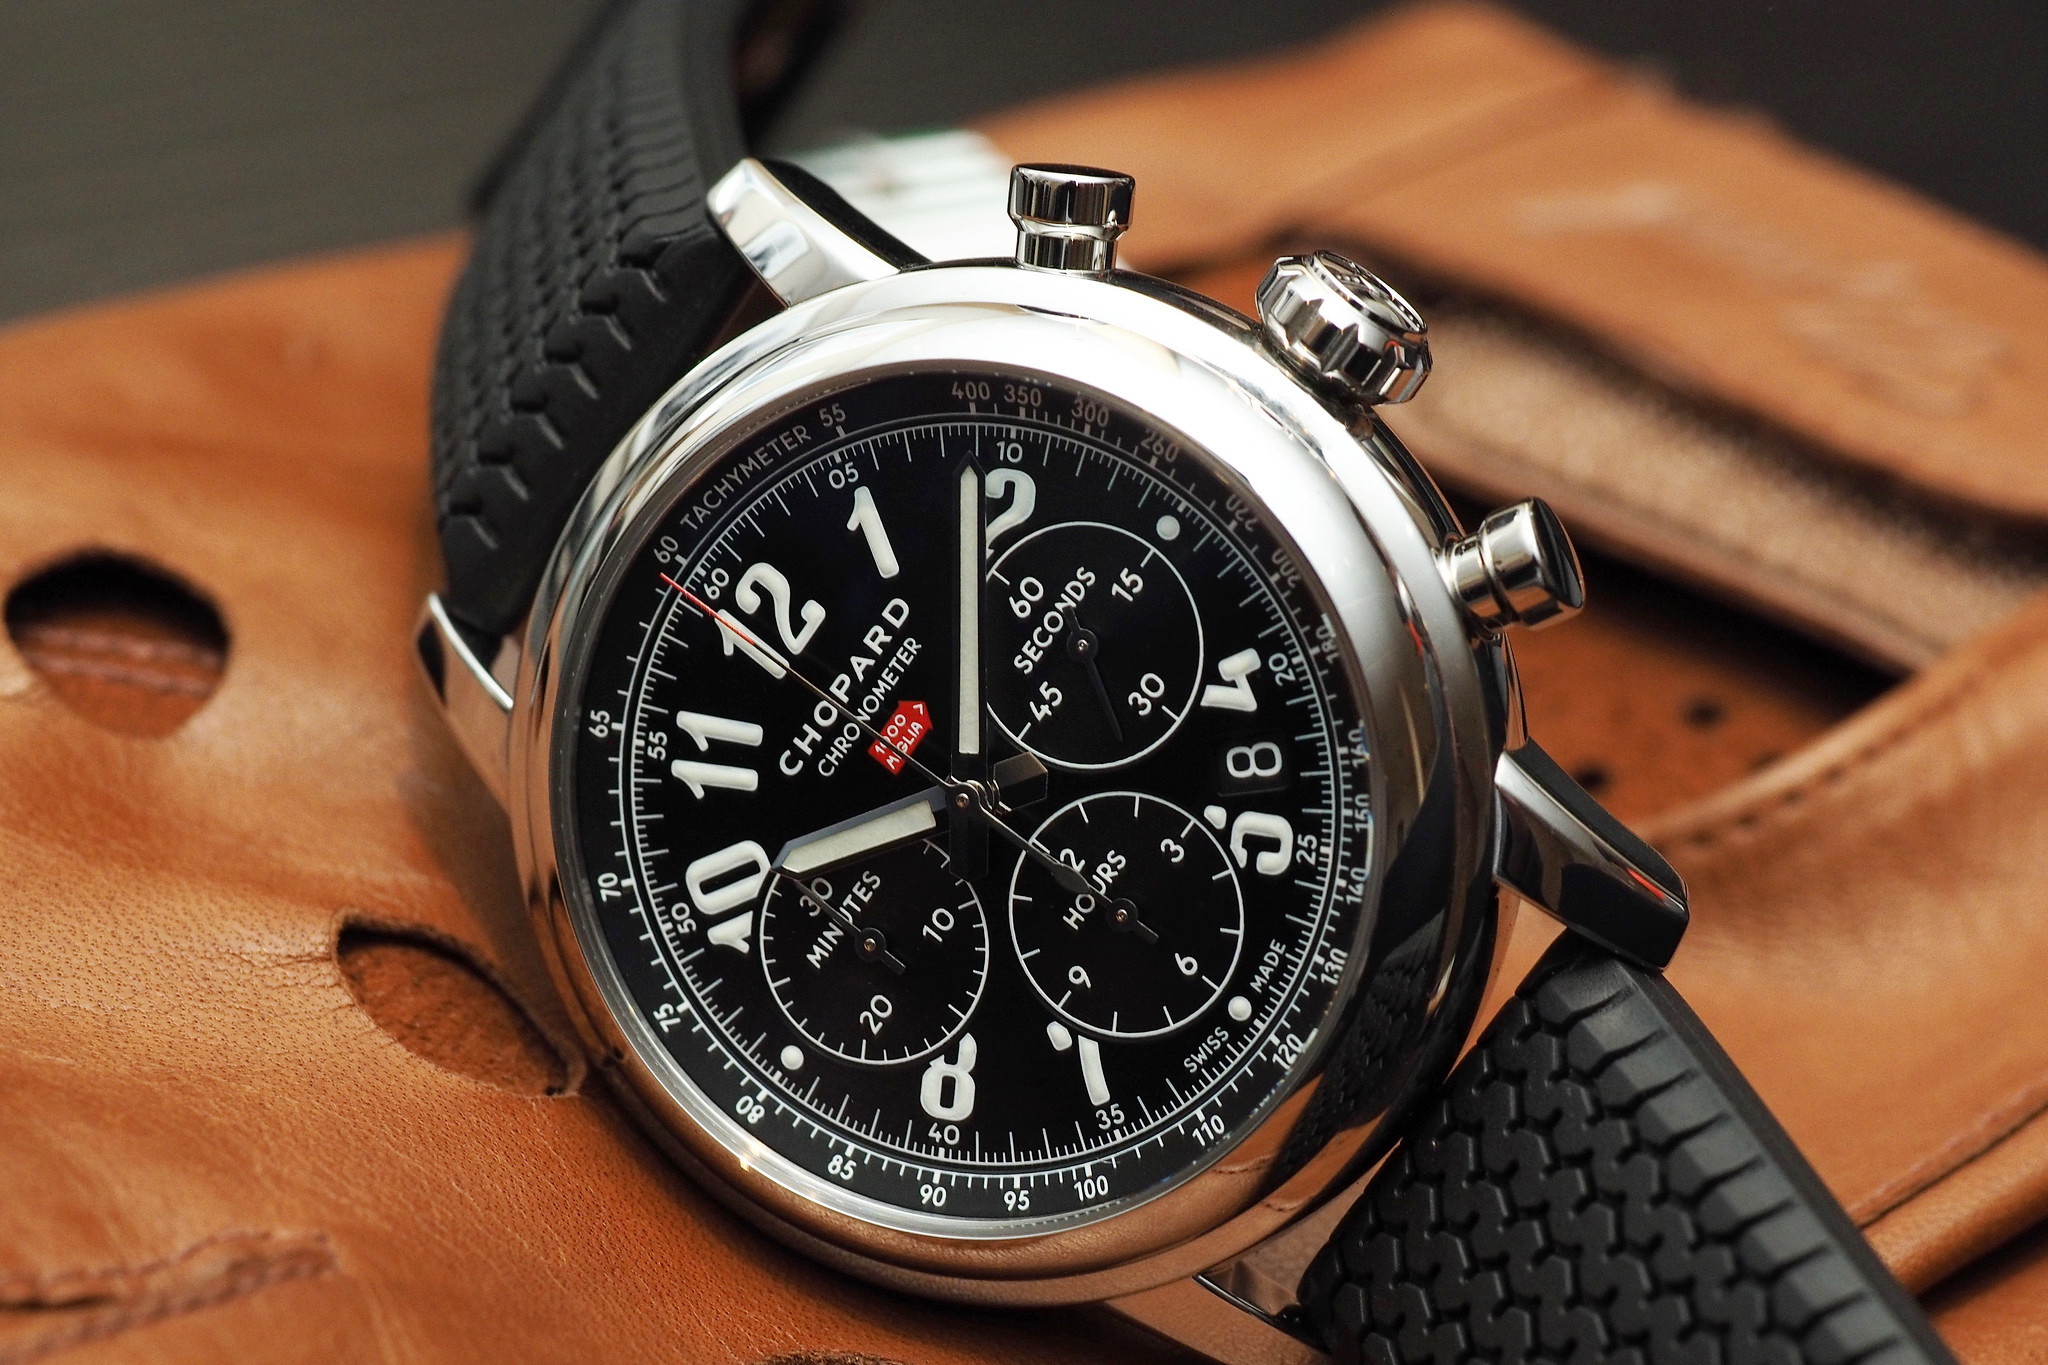 Hands-On: Chopard's New Mille Miglia Chronograph Bridges Old And